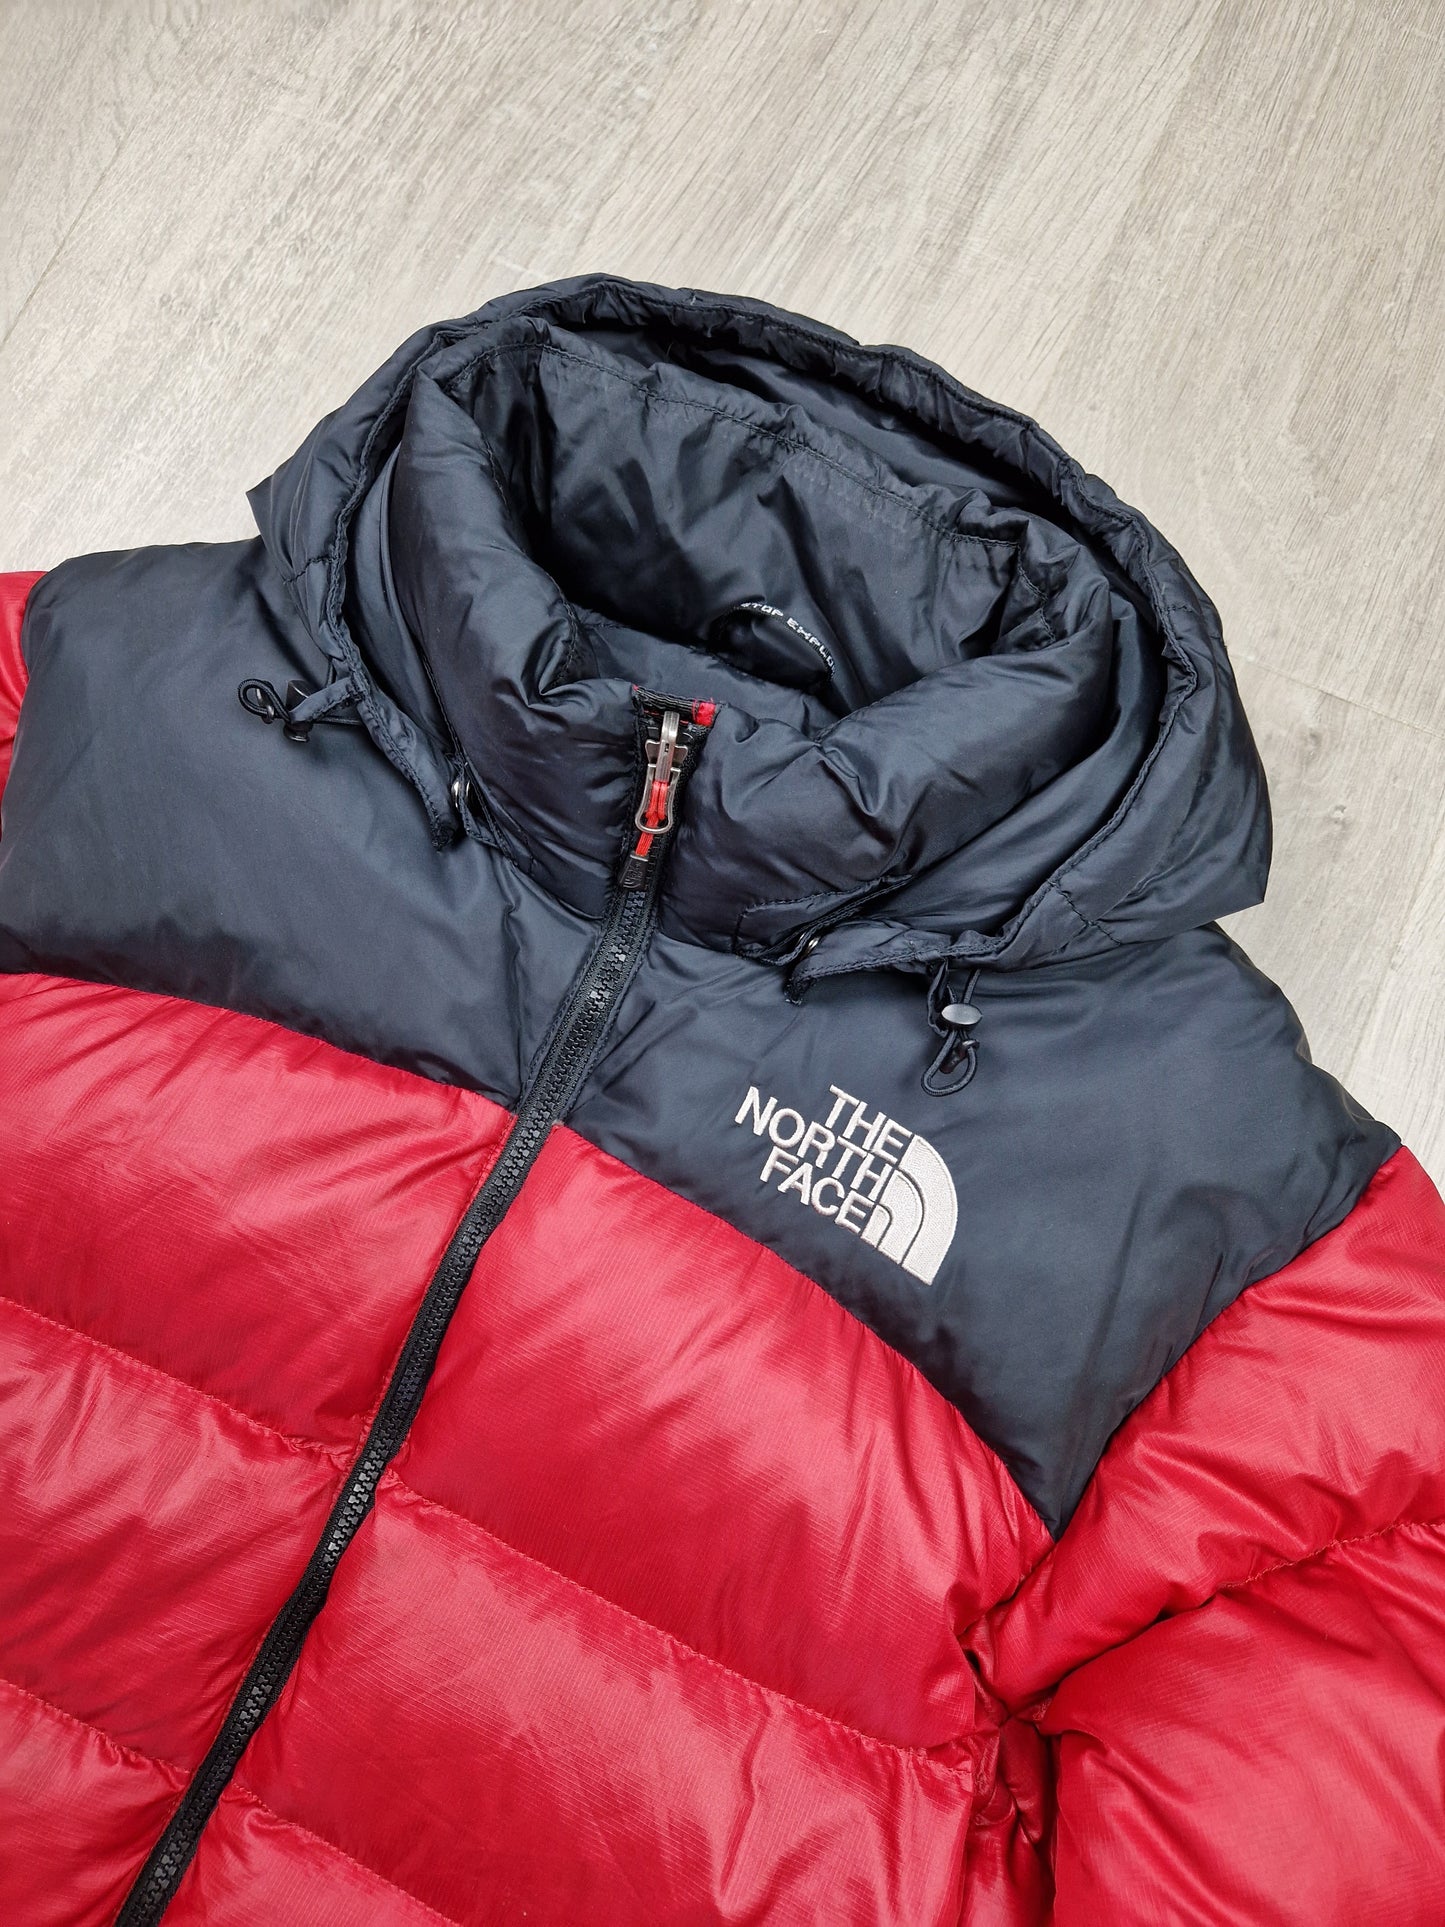 The North Face Nuptse 700 Puffer Jacket (S)